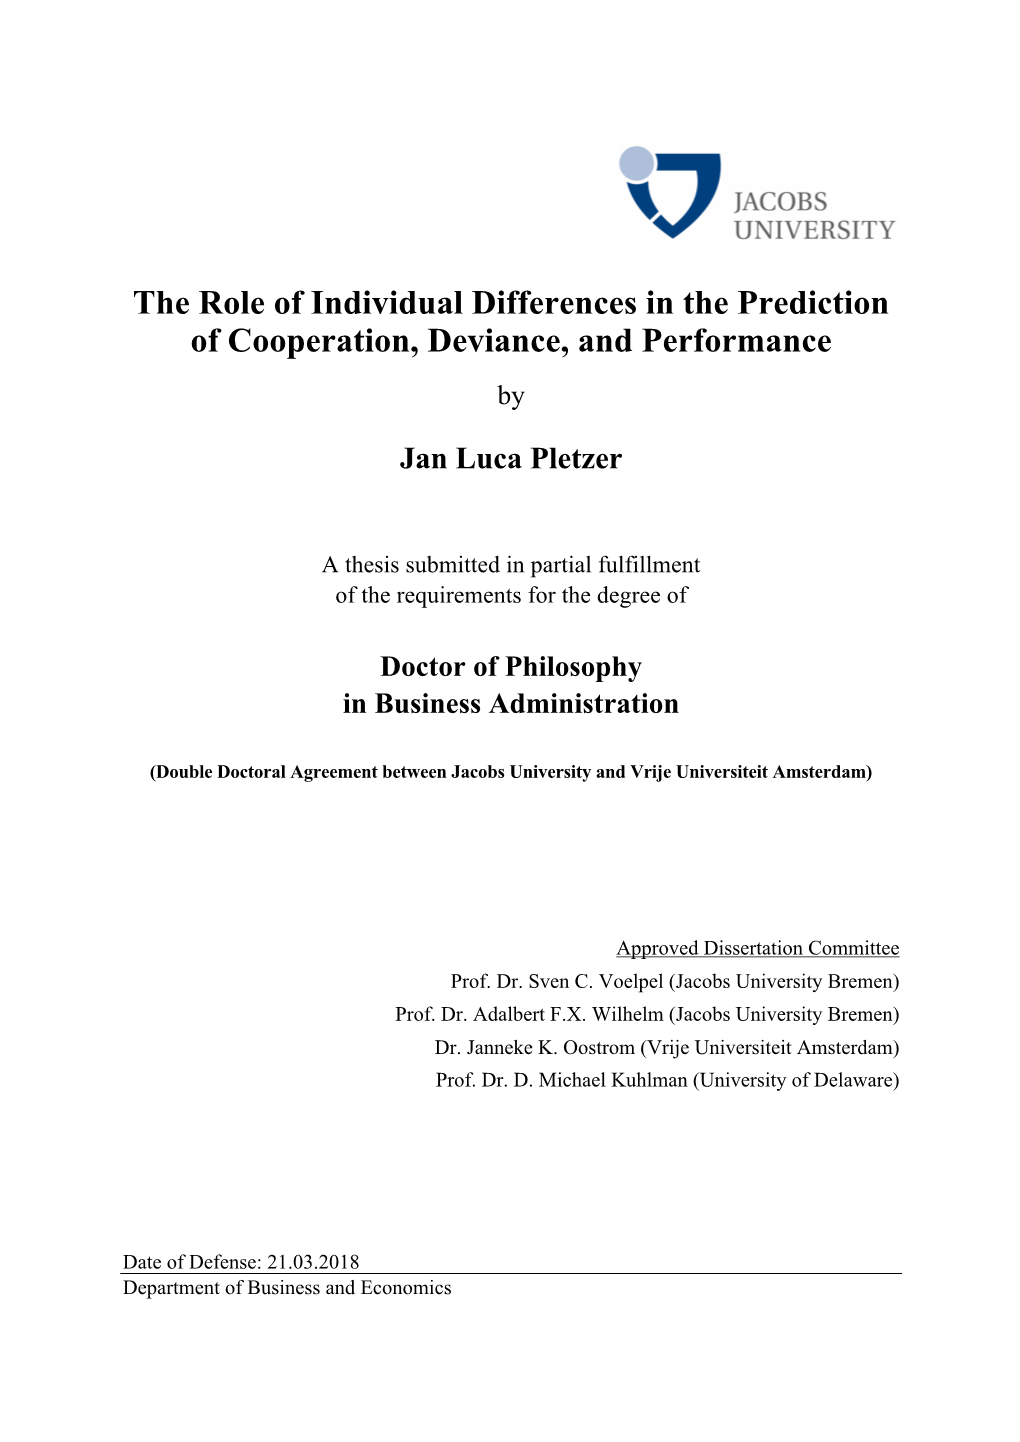 The Role of Individual Differences in the Prediction of Cooperation, Deviance, and Performance By